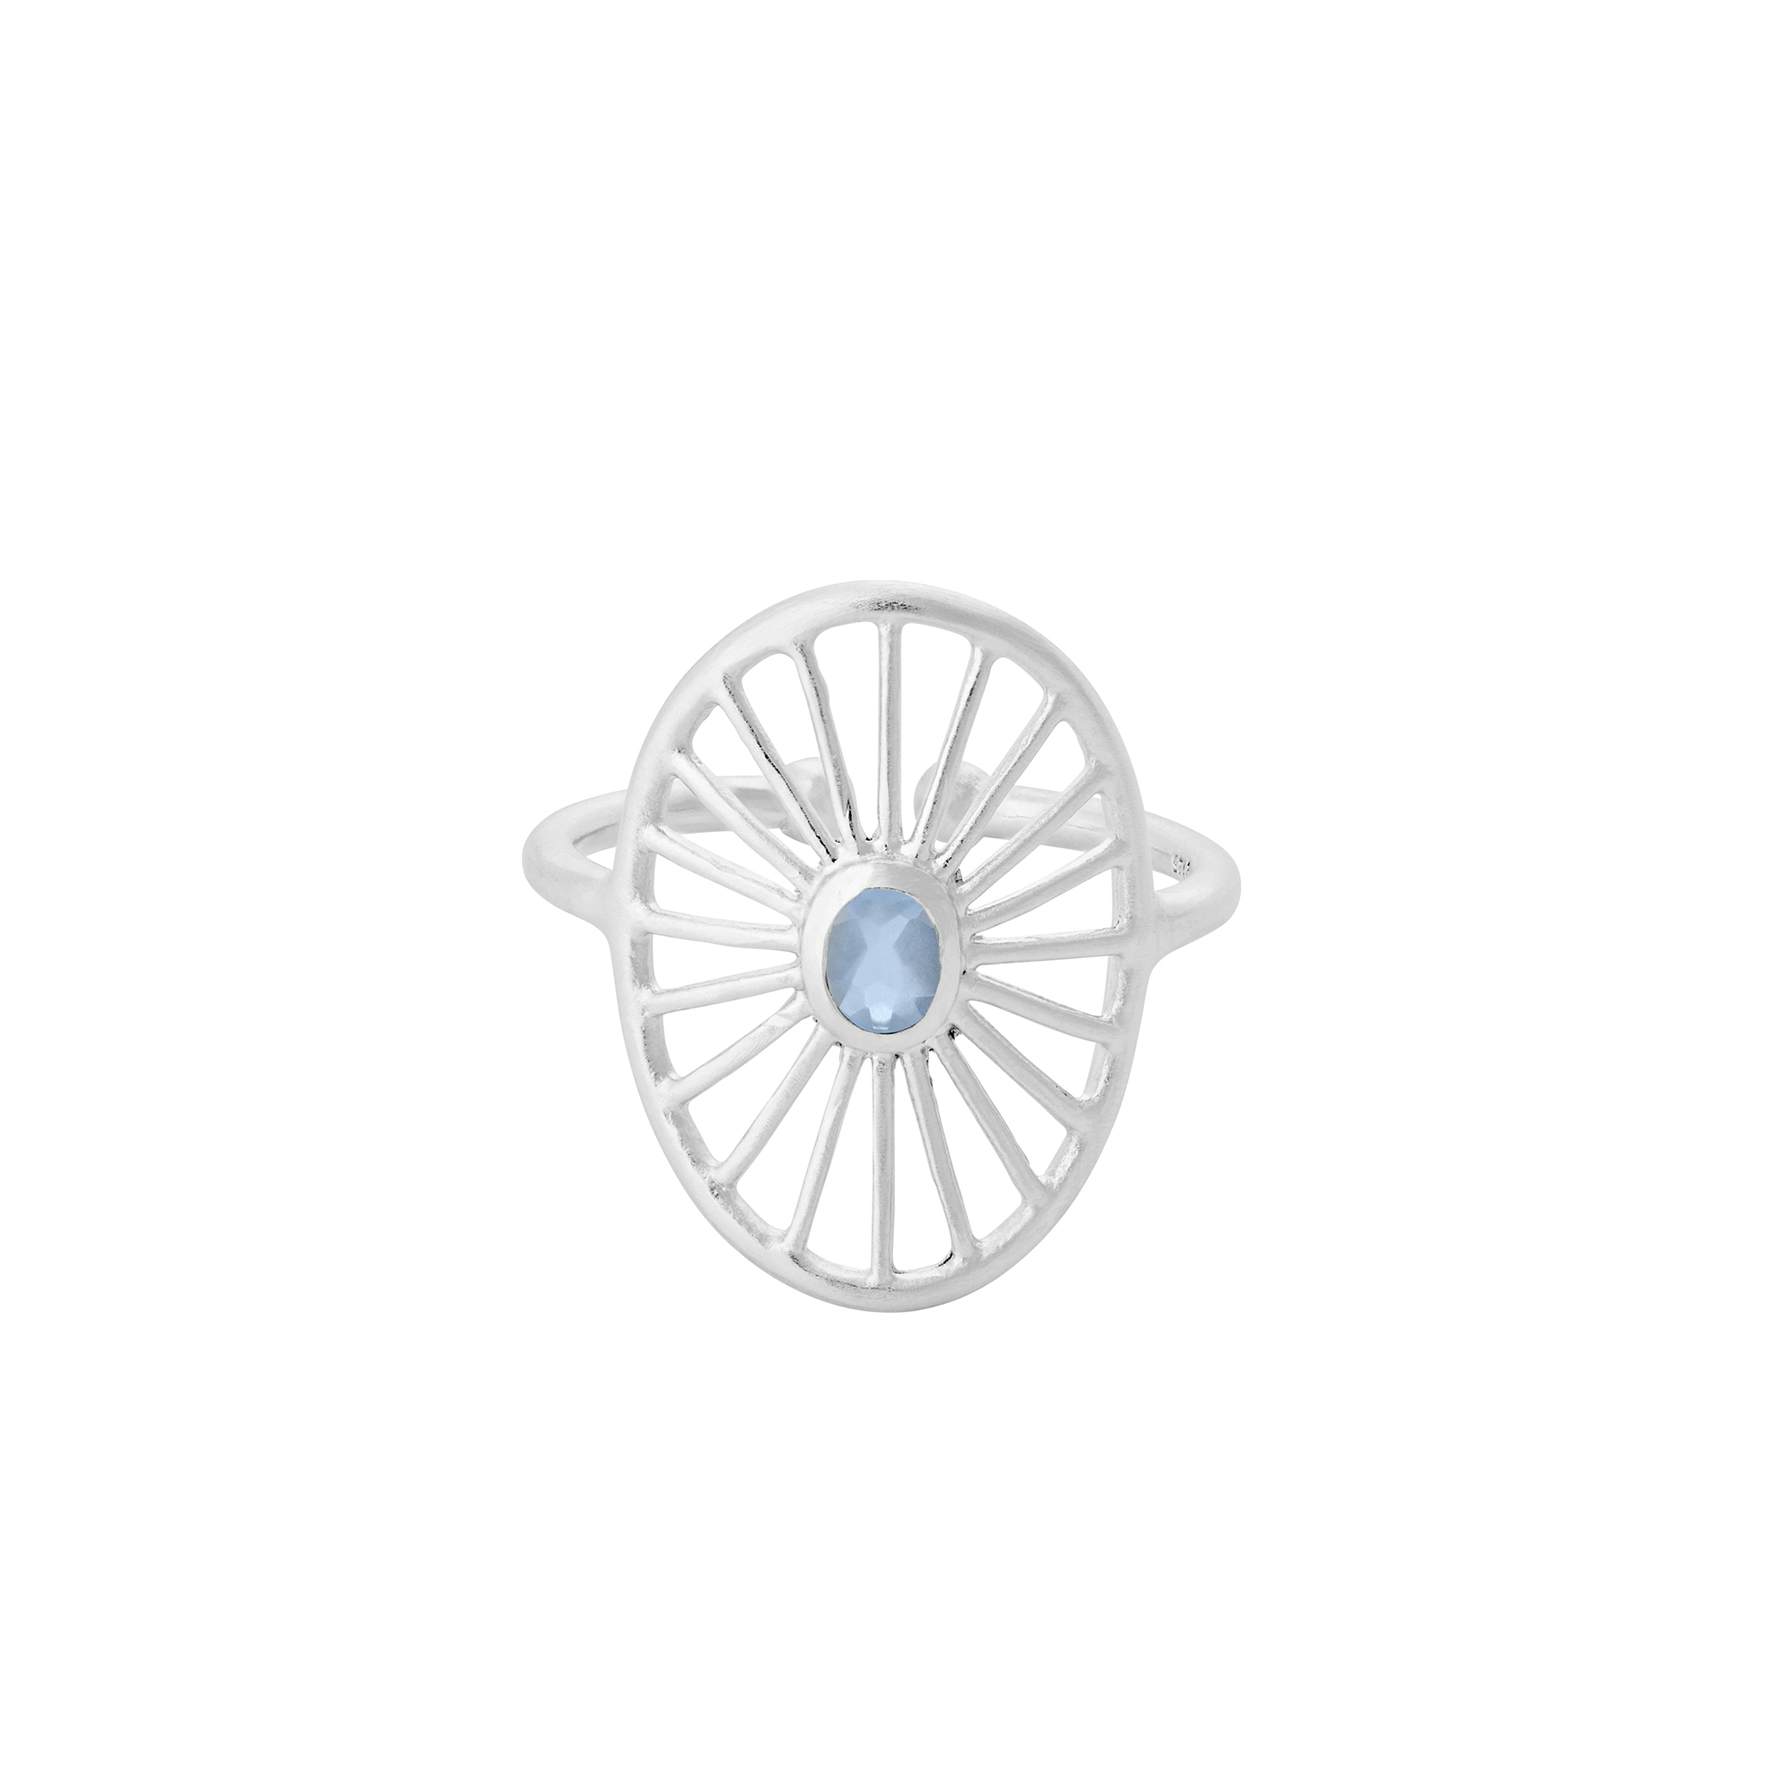 Dream Catcher Ring from Pernille Corydon in Silver Sterling 925|Chalcedony